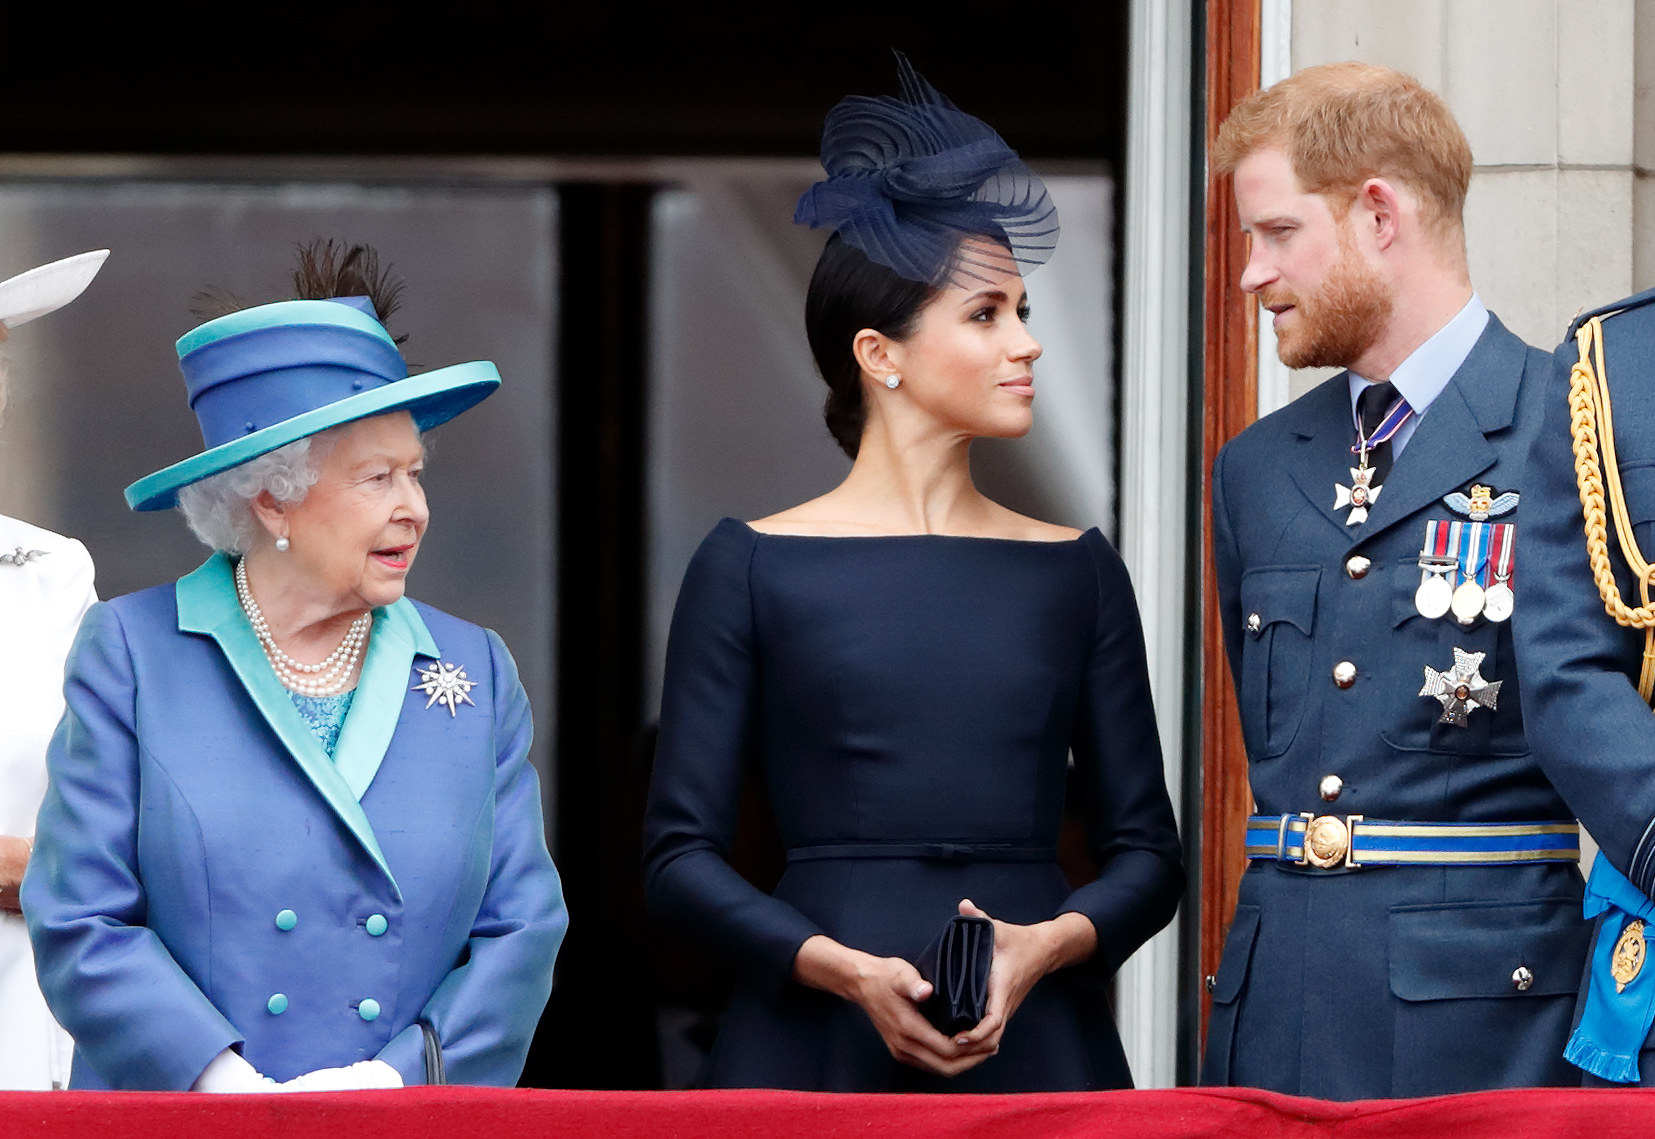 Meghan and Harry look at each other while standing next to the Queen at an event